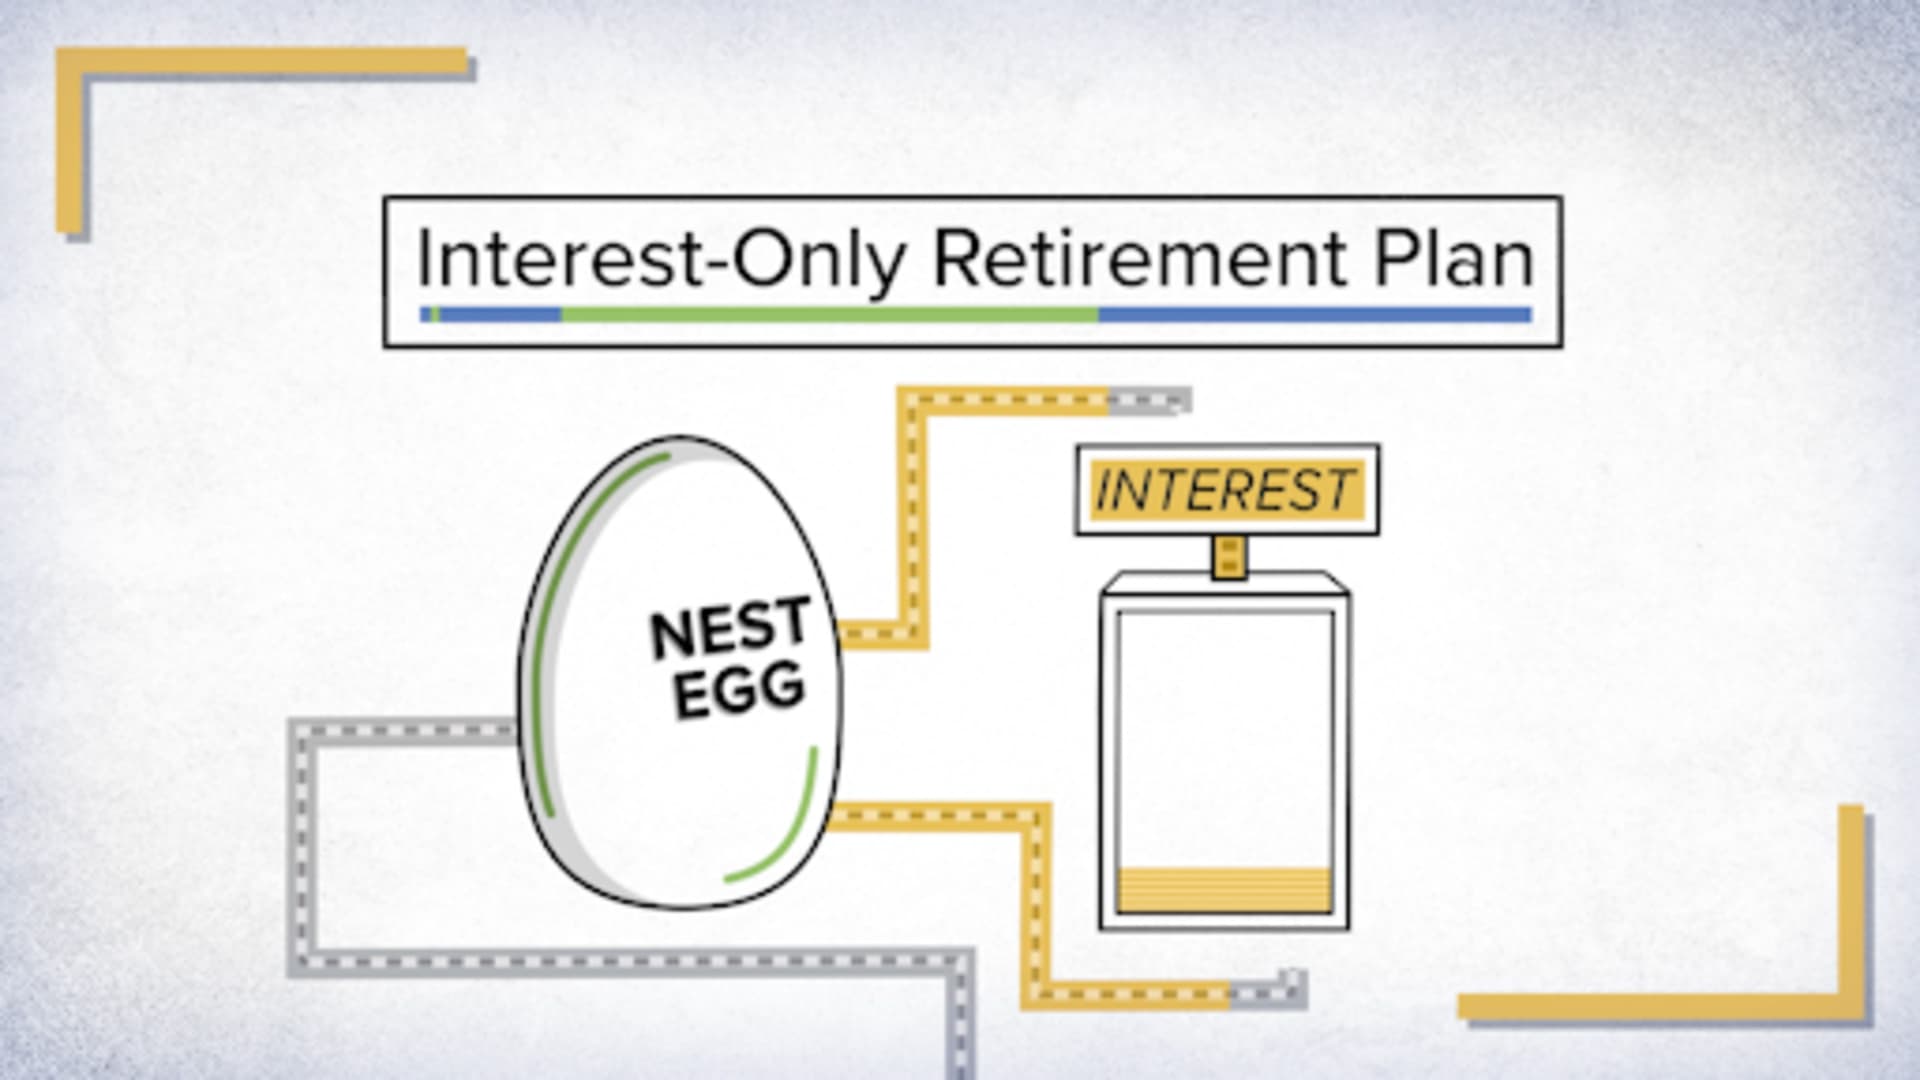 How much savings you need for $30,000 a year in interest at retirement